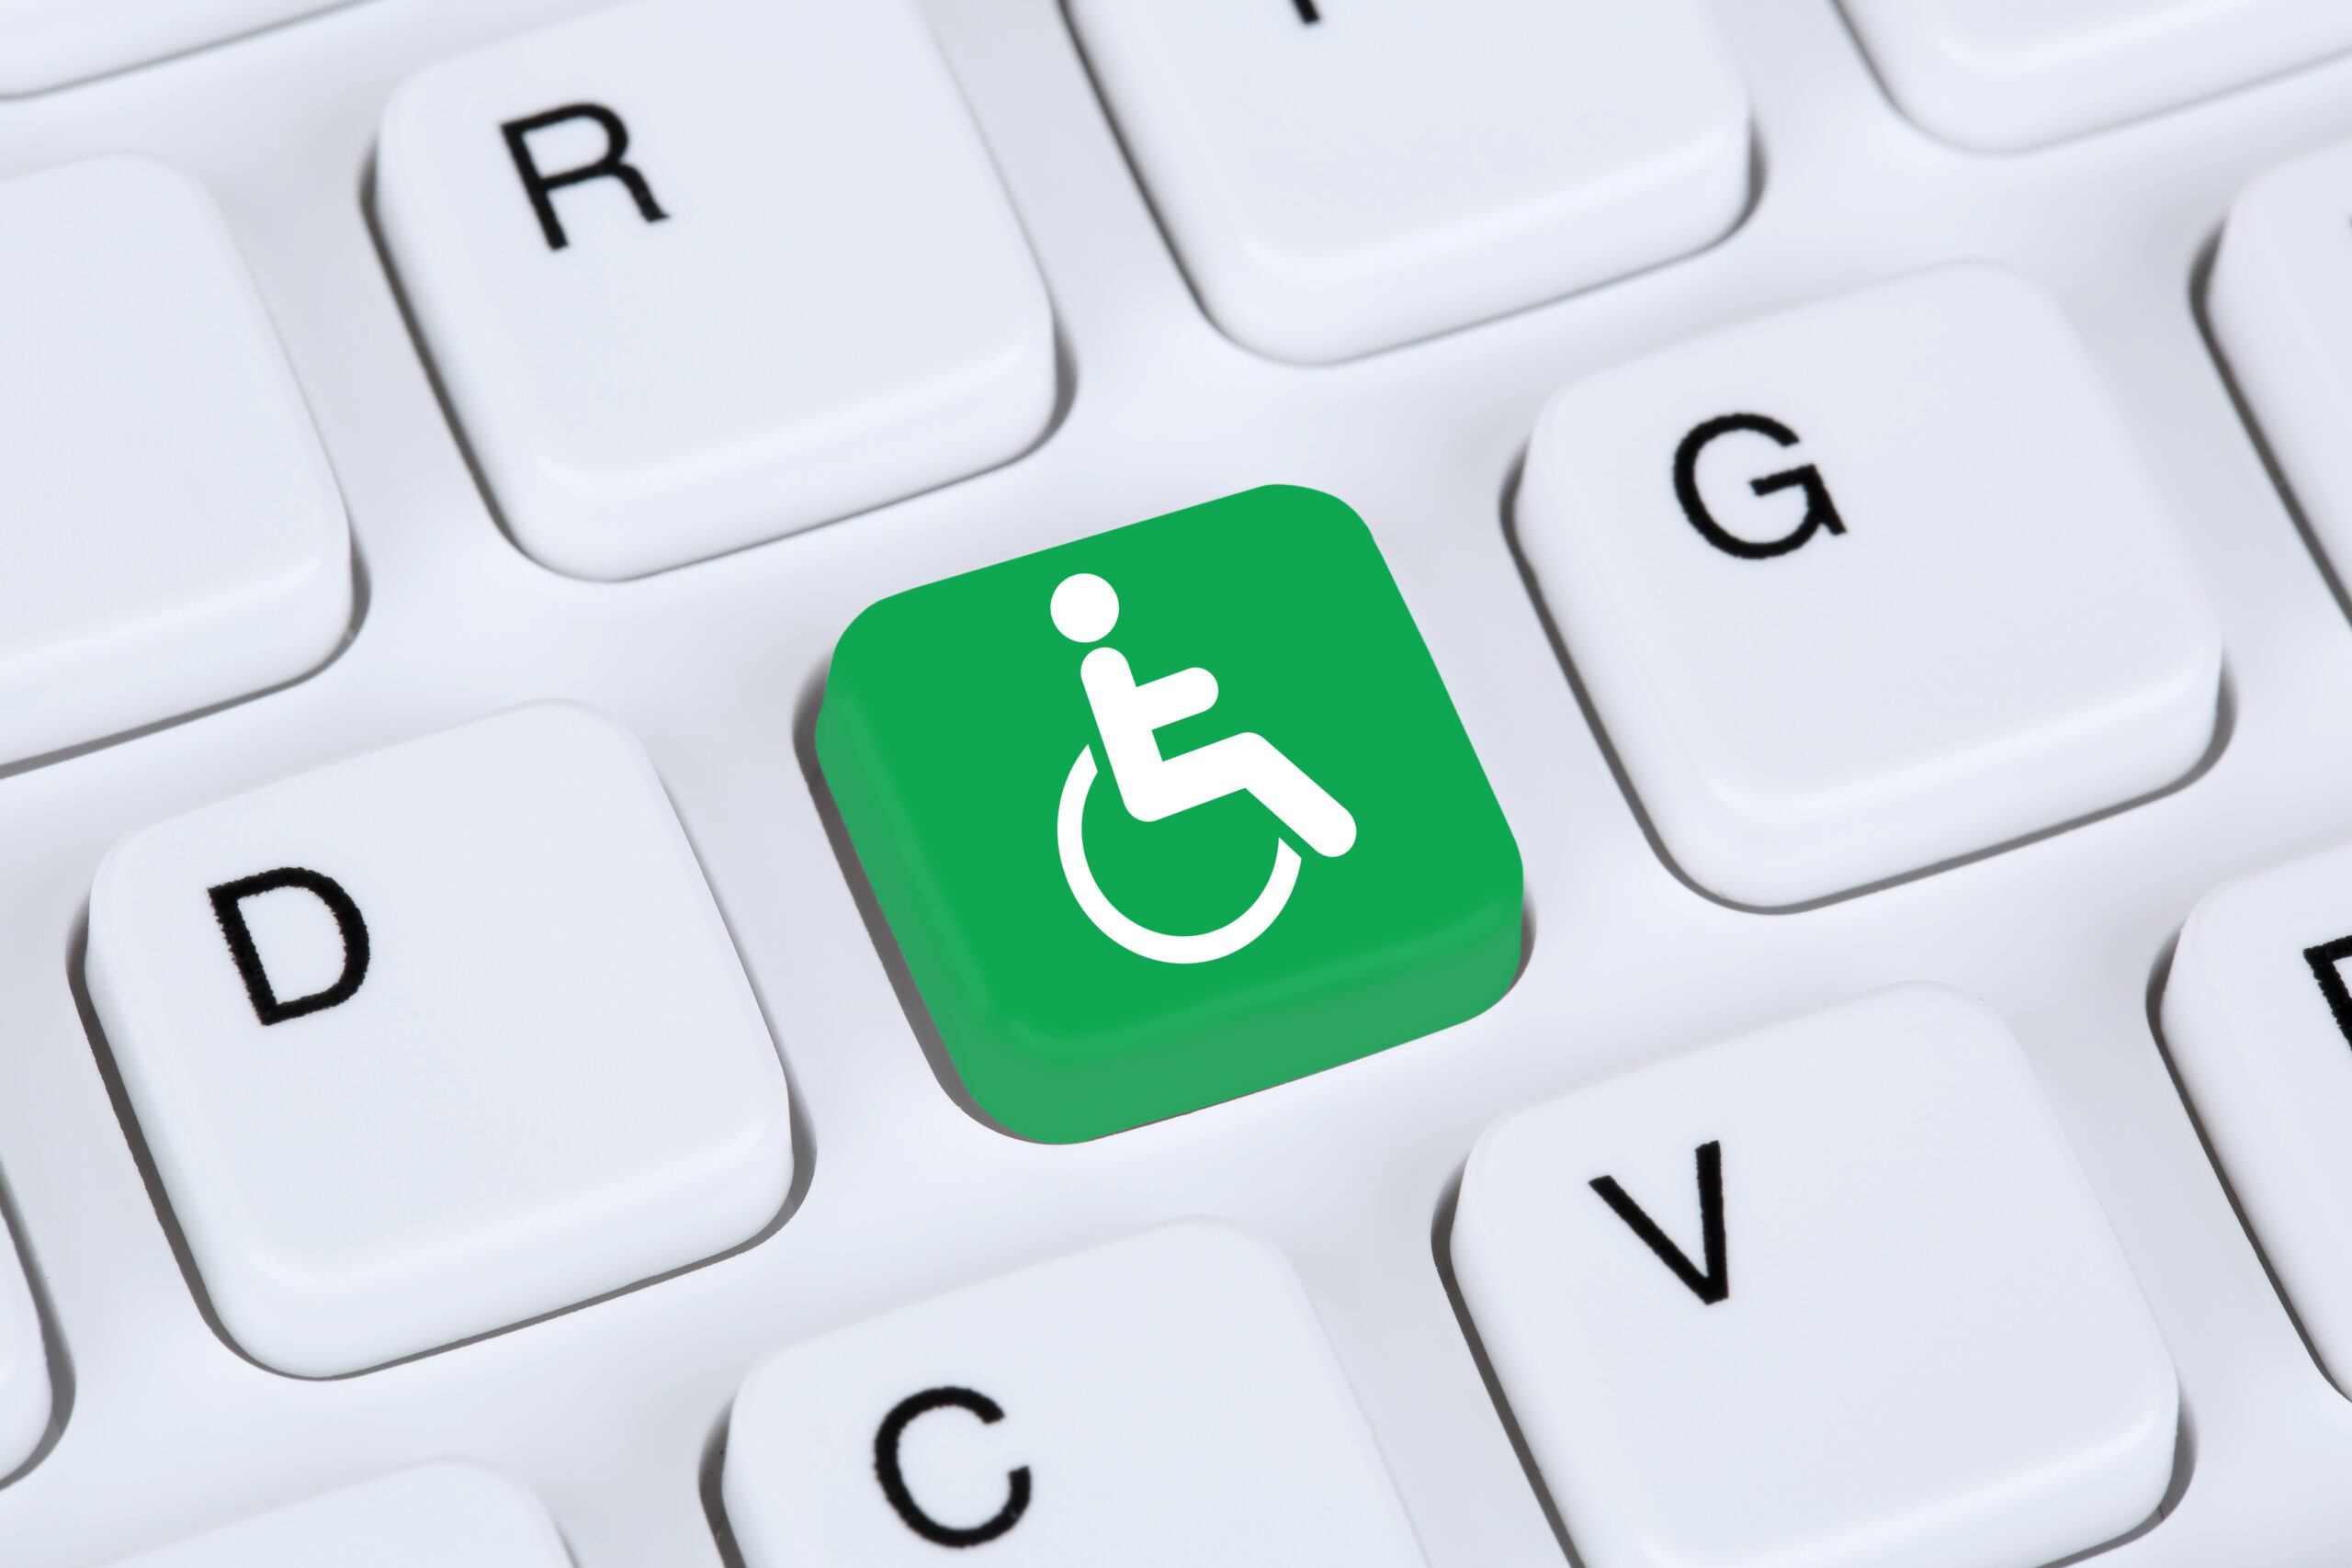 Web accessibility online on internet website computer for handicap people with disabilities